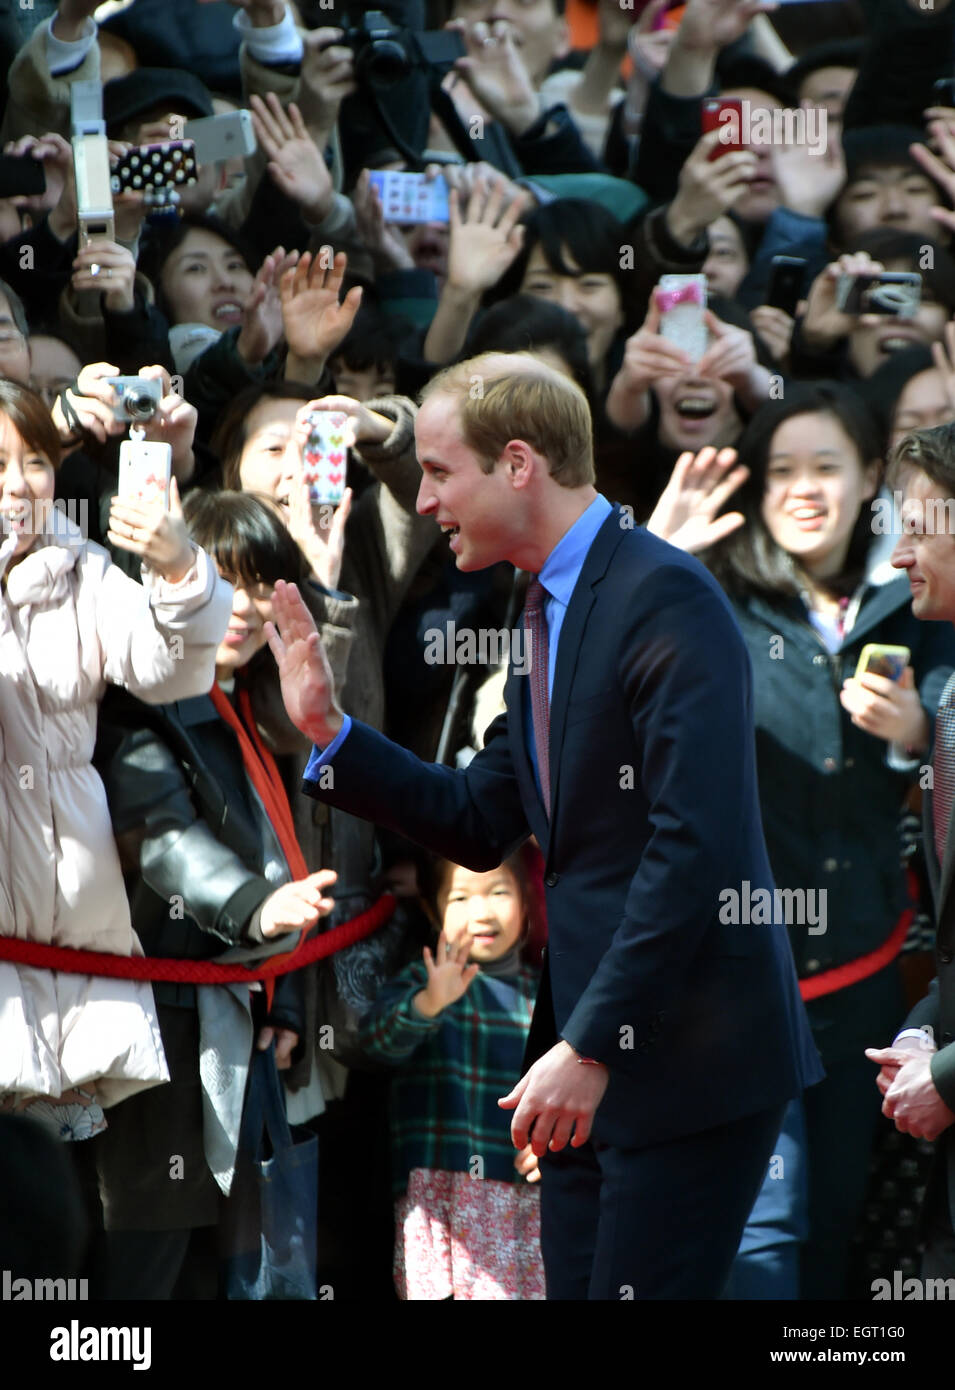 Tokyo, Japan. 28th Feb, 2015. Britain's Prince William is greeted by a throng of Japanese upon his visit to the British Fair in Tokyo's upscale Daikanyama neighborhood on Saturday, February 28, 2015. The second-in-line to the British throne arrived in Japan on Thursday without his pregnant wife, Duchess of Cambridge, on a four-day visit including a trip to Fukushima before leaving for Beijing on Sunday. © Natsuki Sakai/AFLO/Alamy Live News Stock Photo